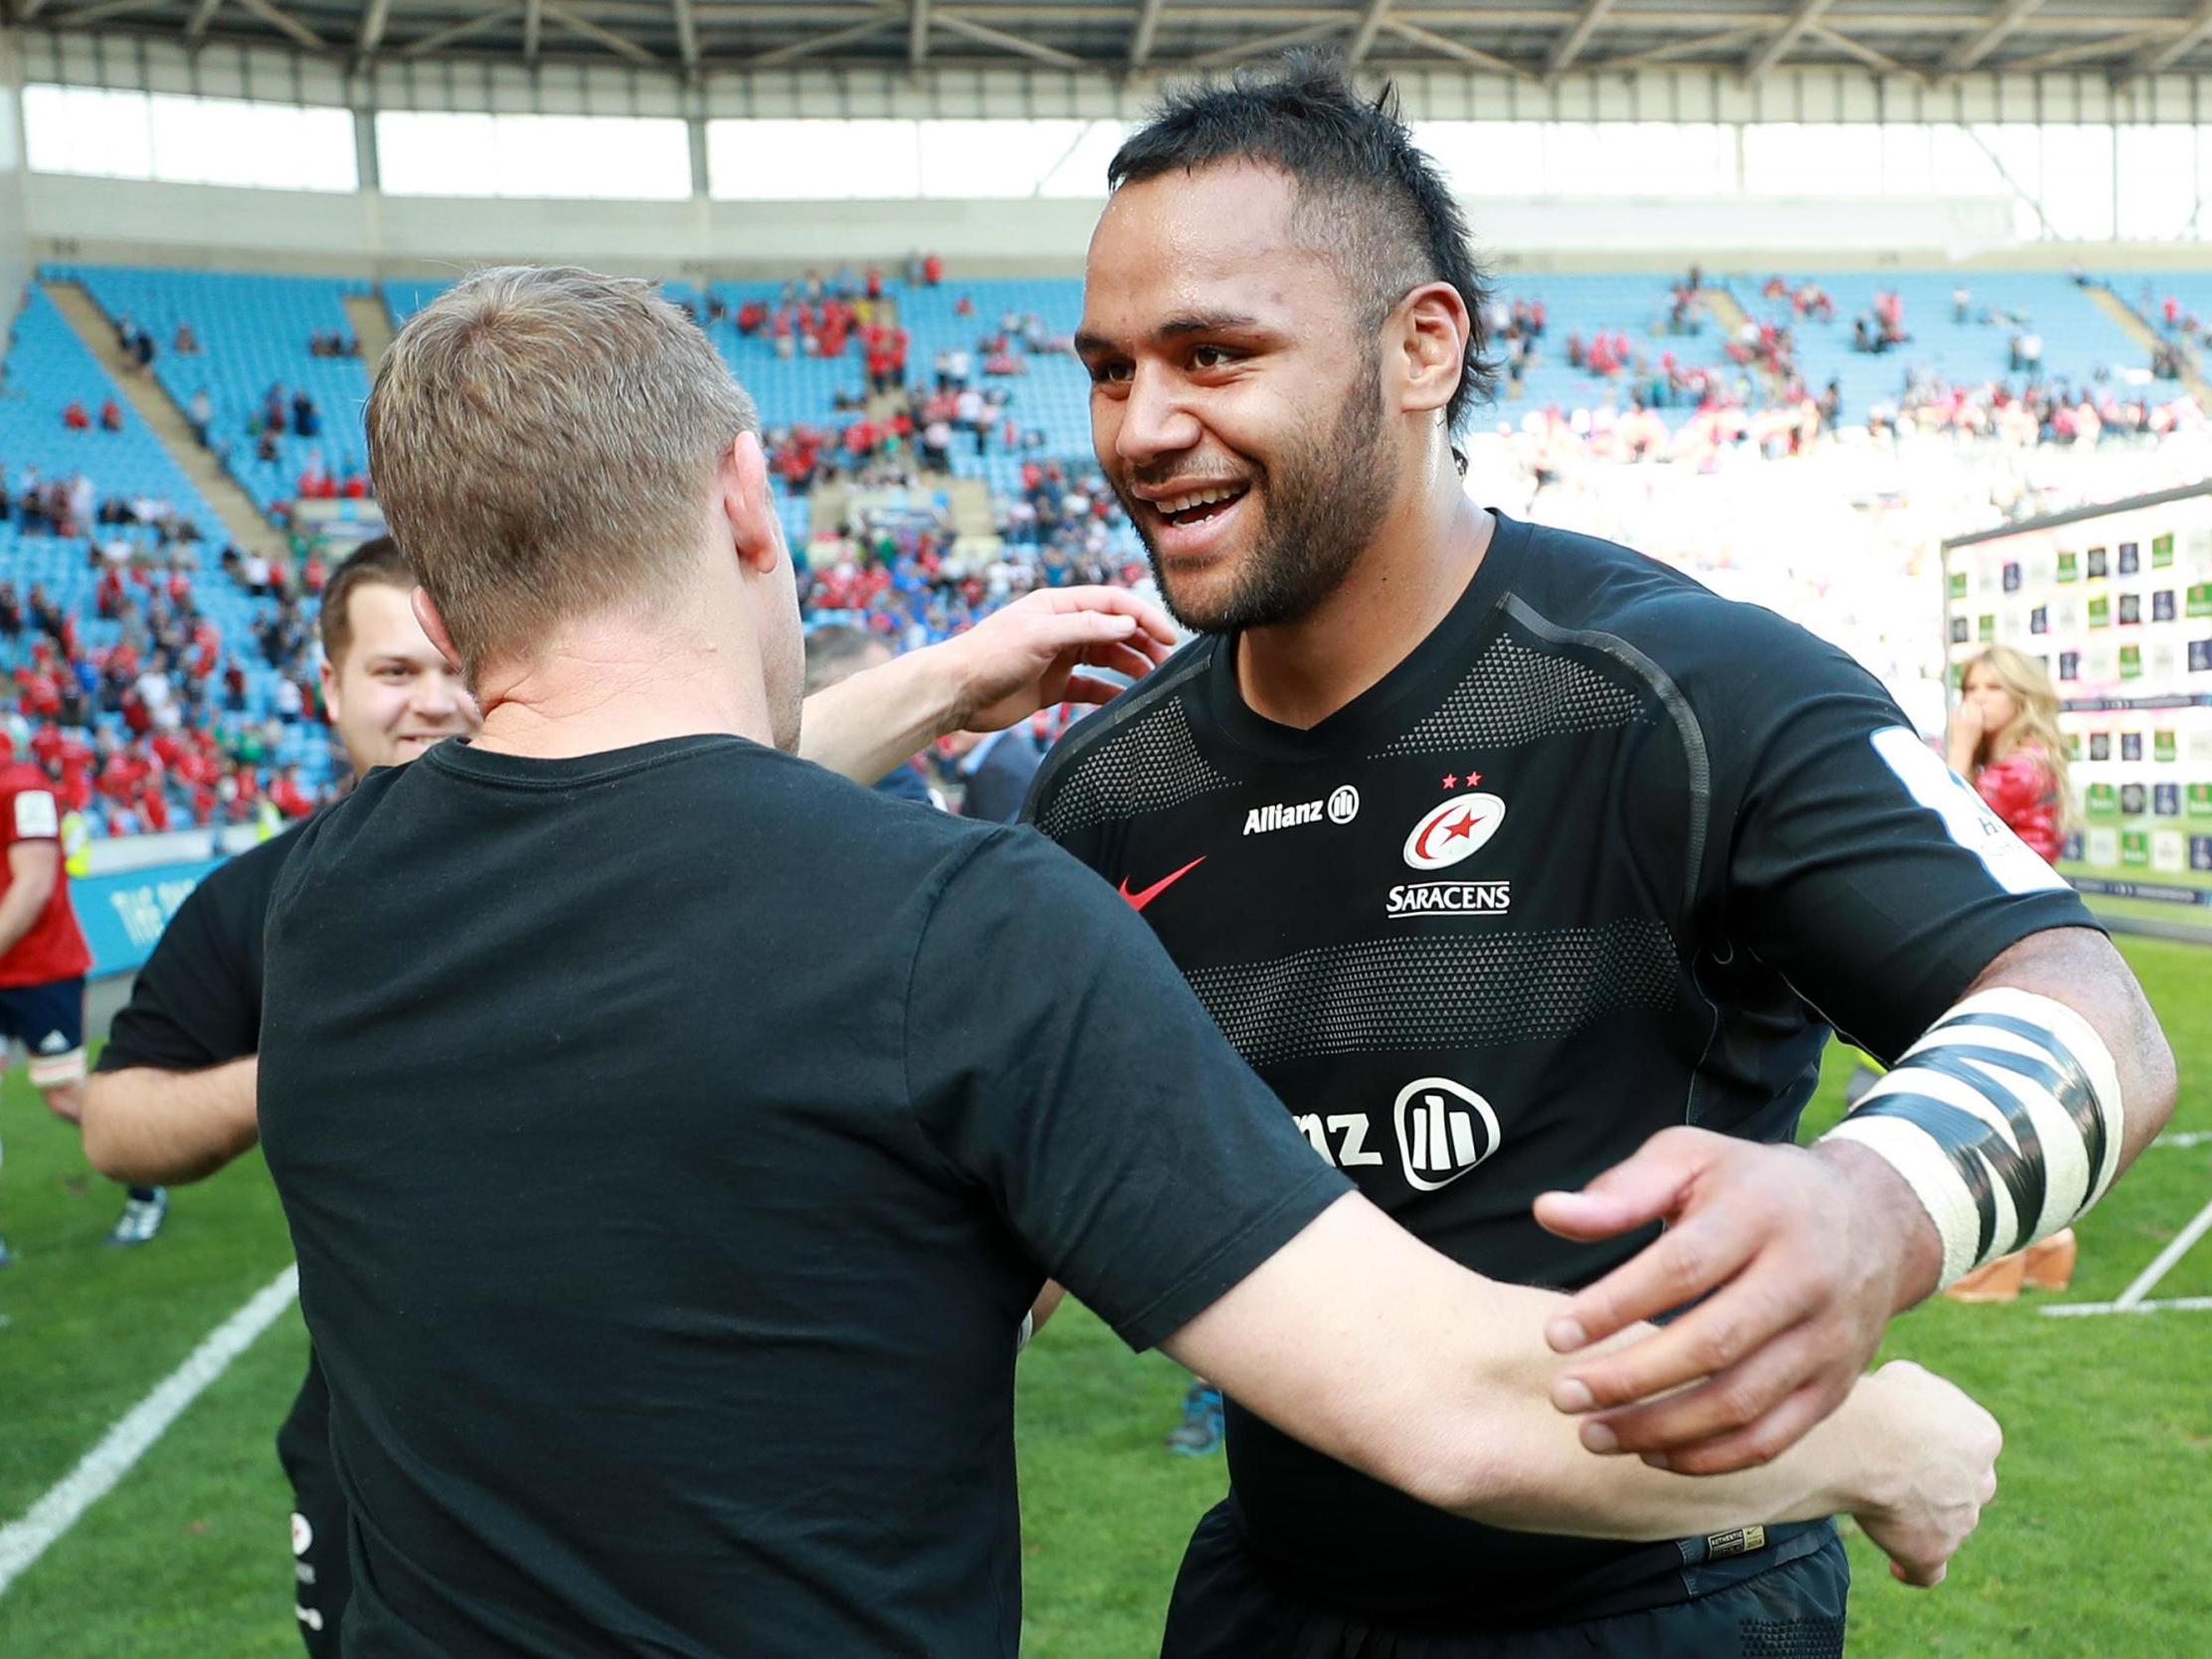 Billy Vunipola claimed the man of the match award as Saracens beat Munster 32-16 in the Champions Cup semi-final